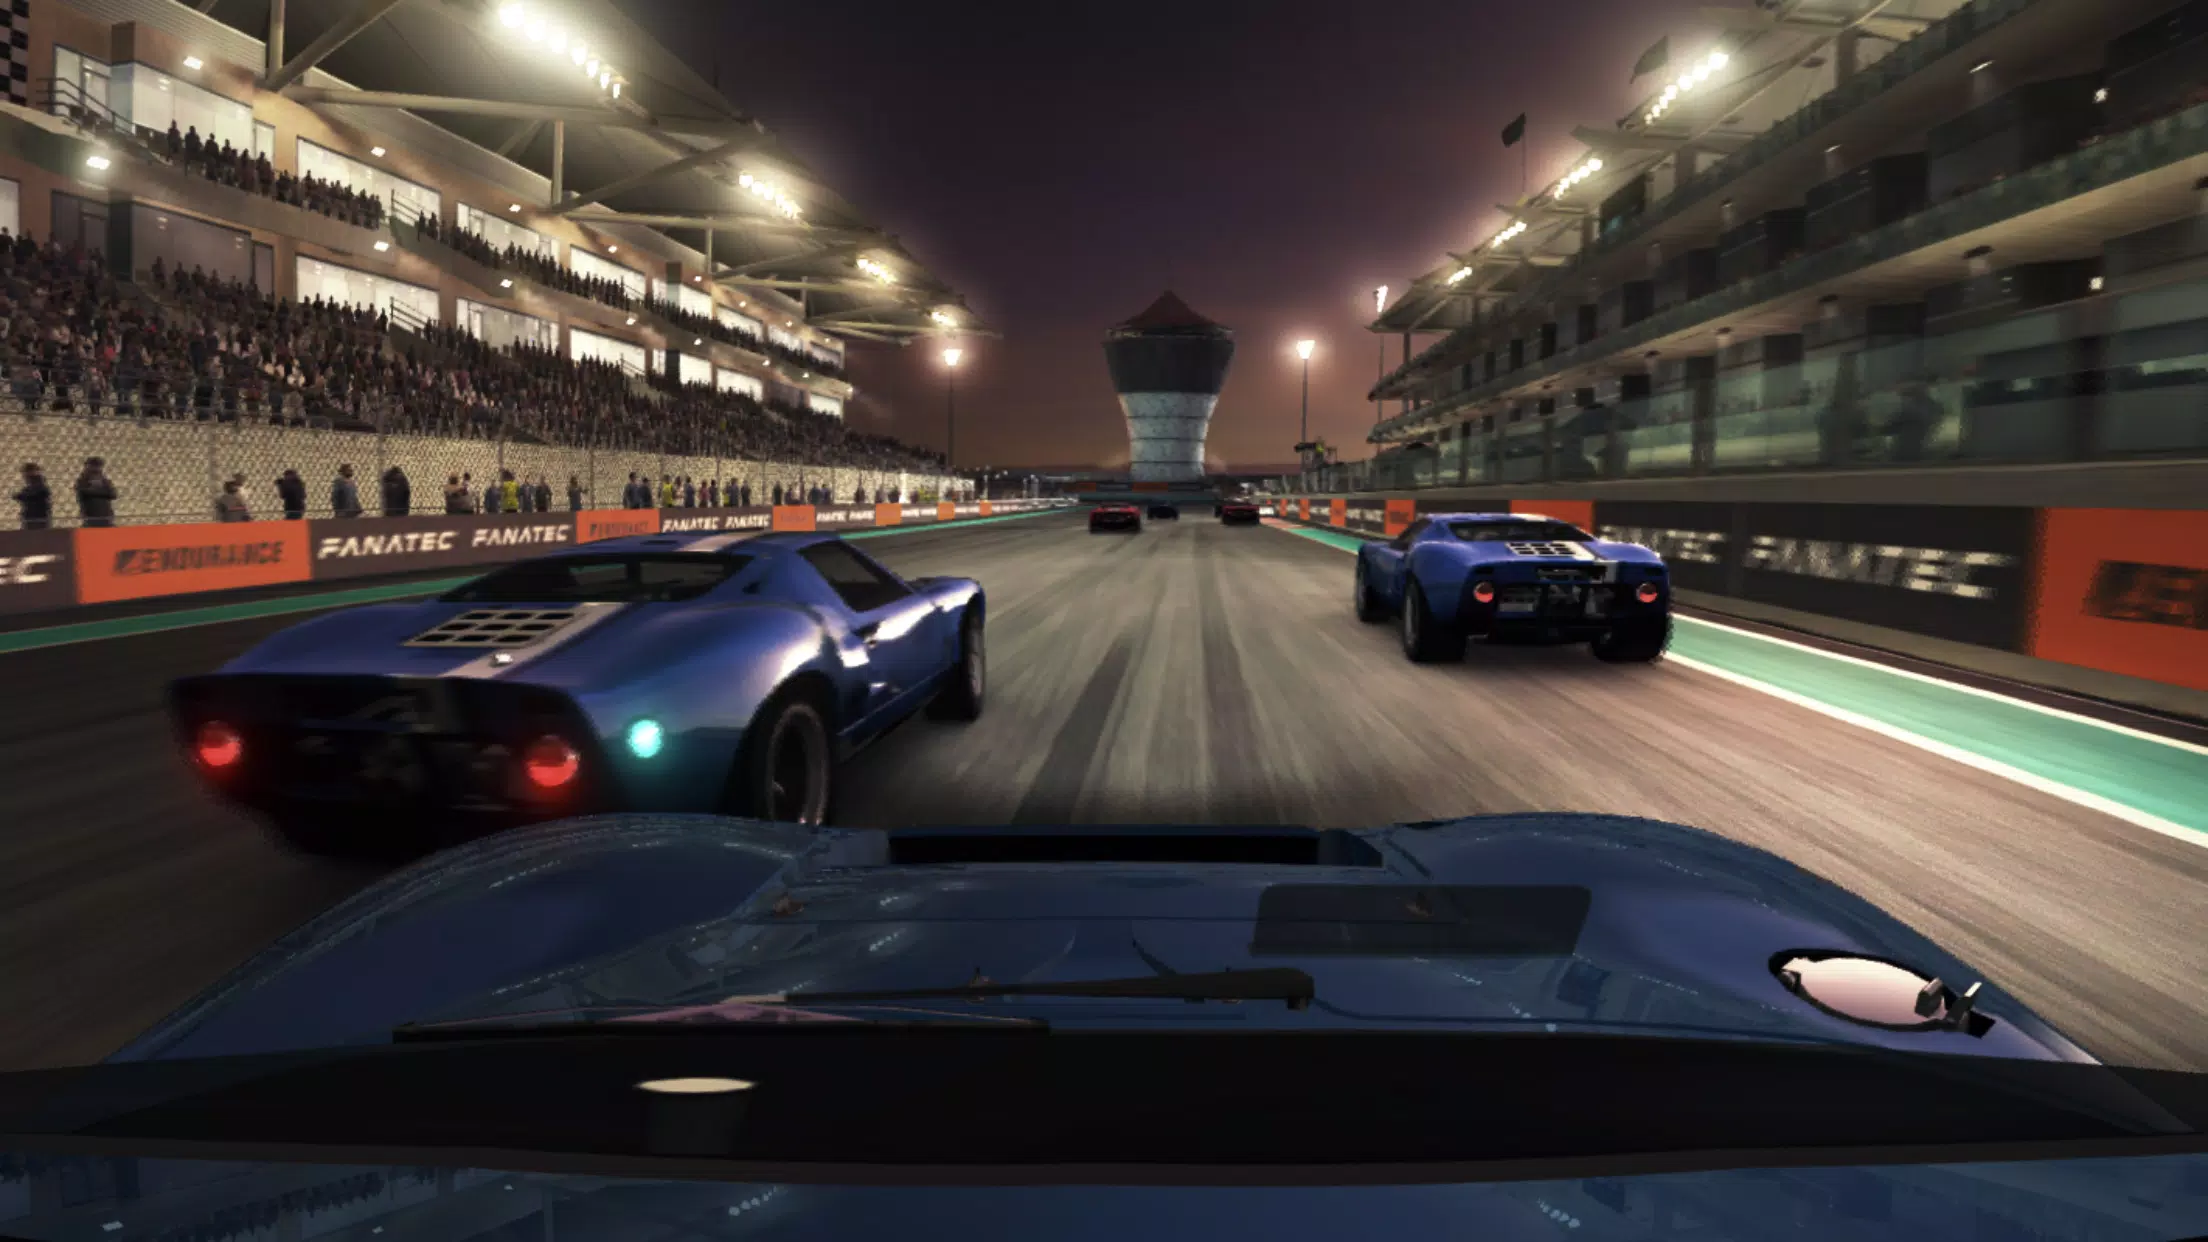 GRID Autosport released for Linux & SteamOS, port report, video and review  included